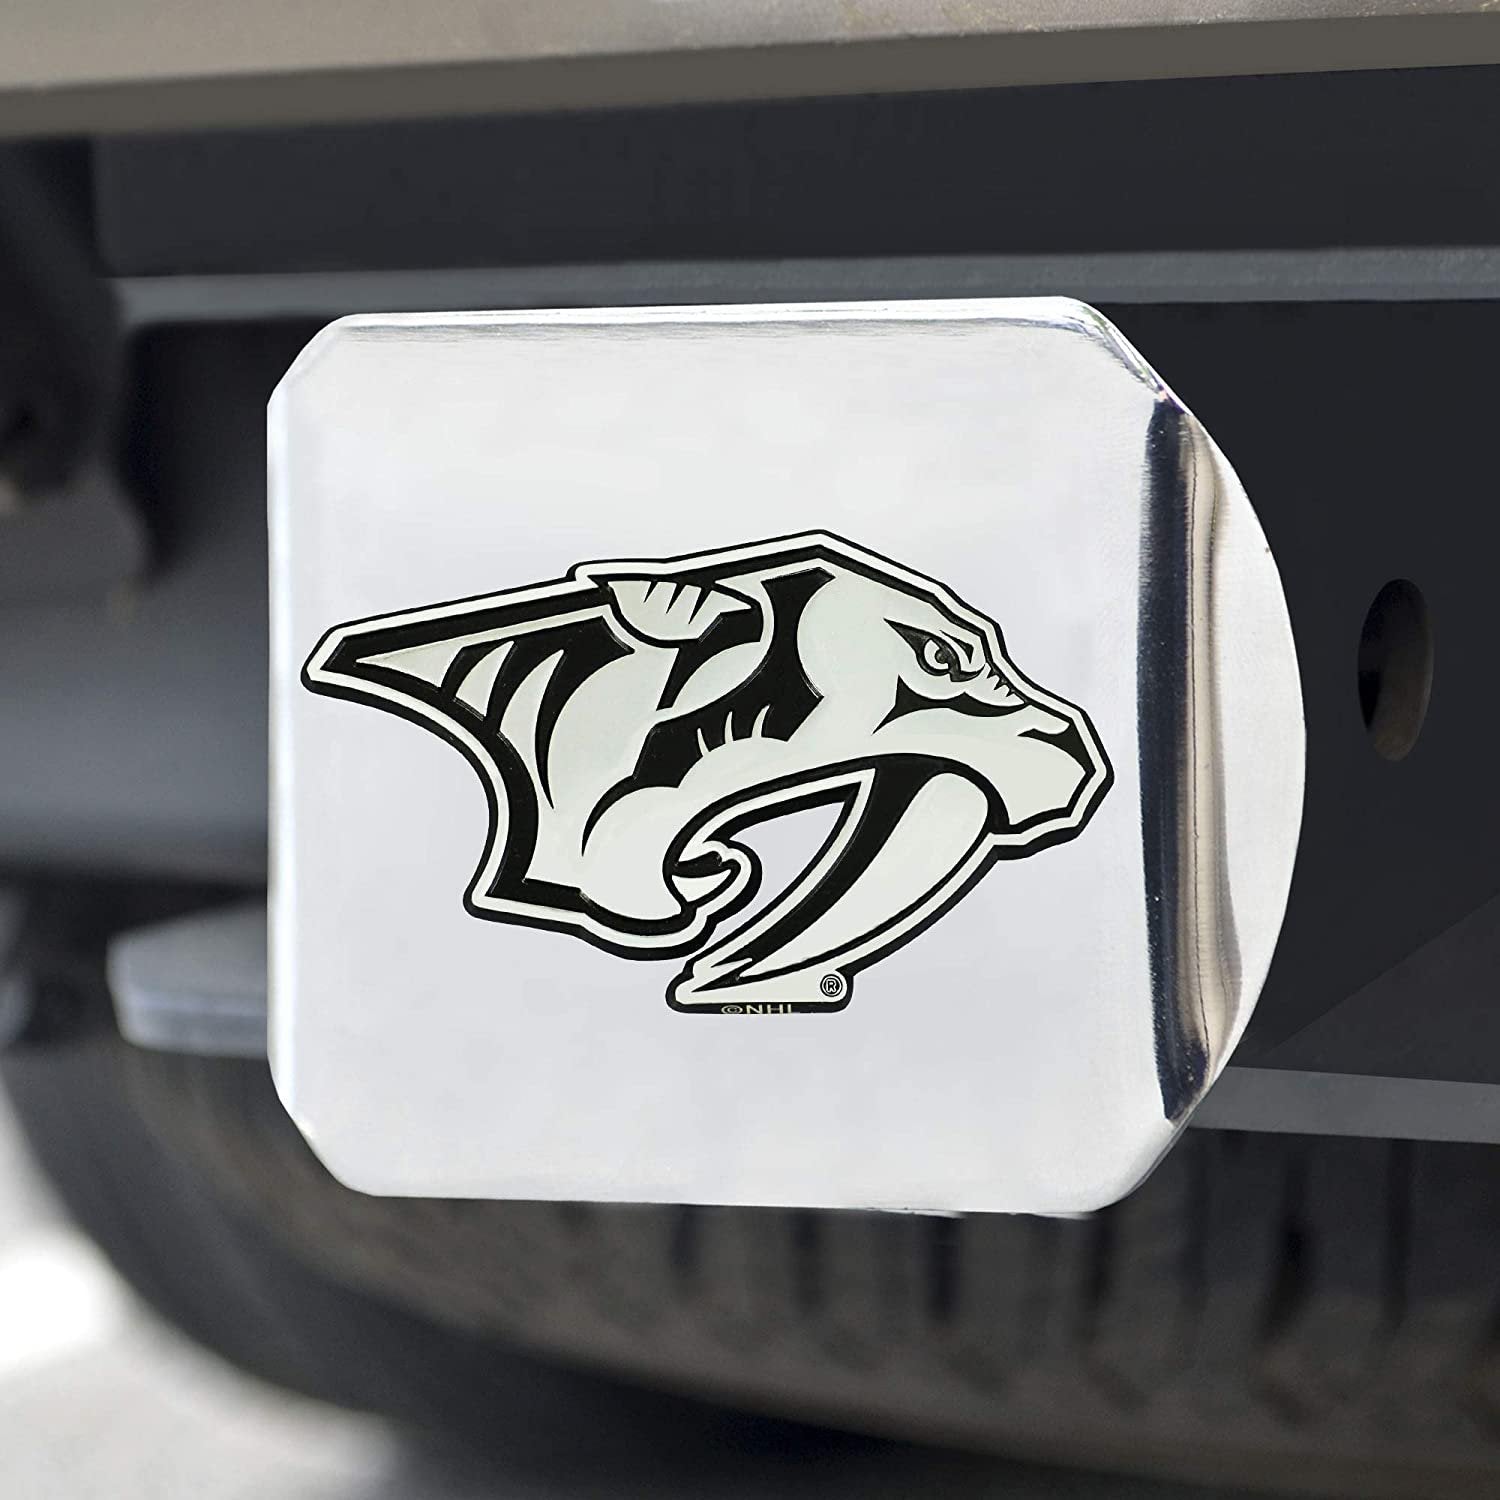 Nashville Predators Hitch Cover Solid Metal with Raised Chrome Metal Emblem 2" Square Type III